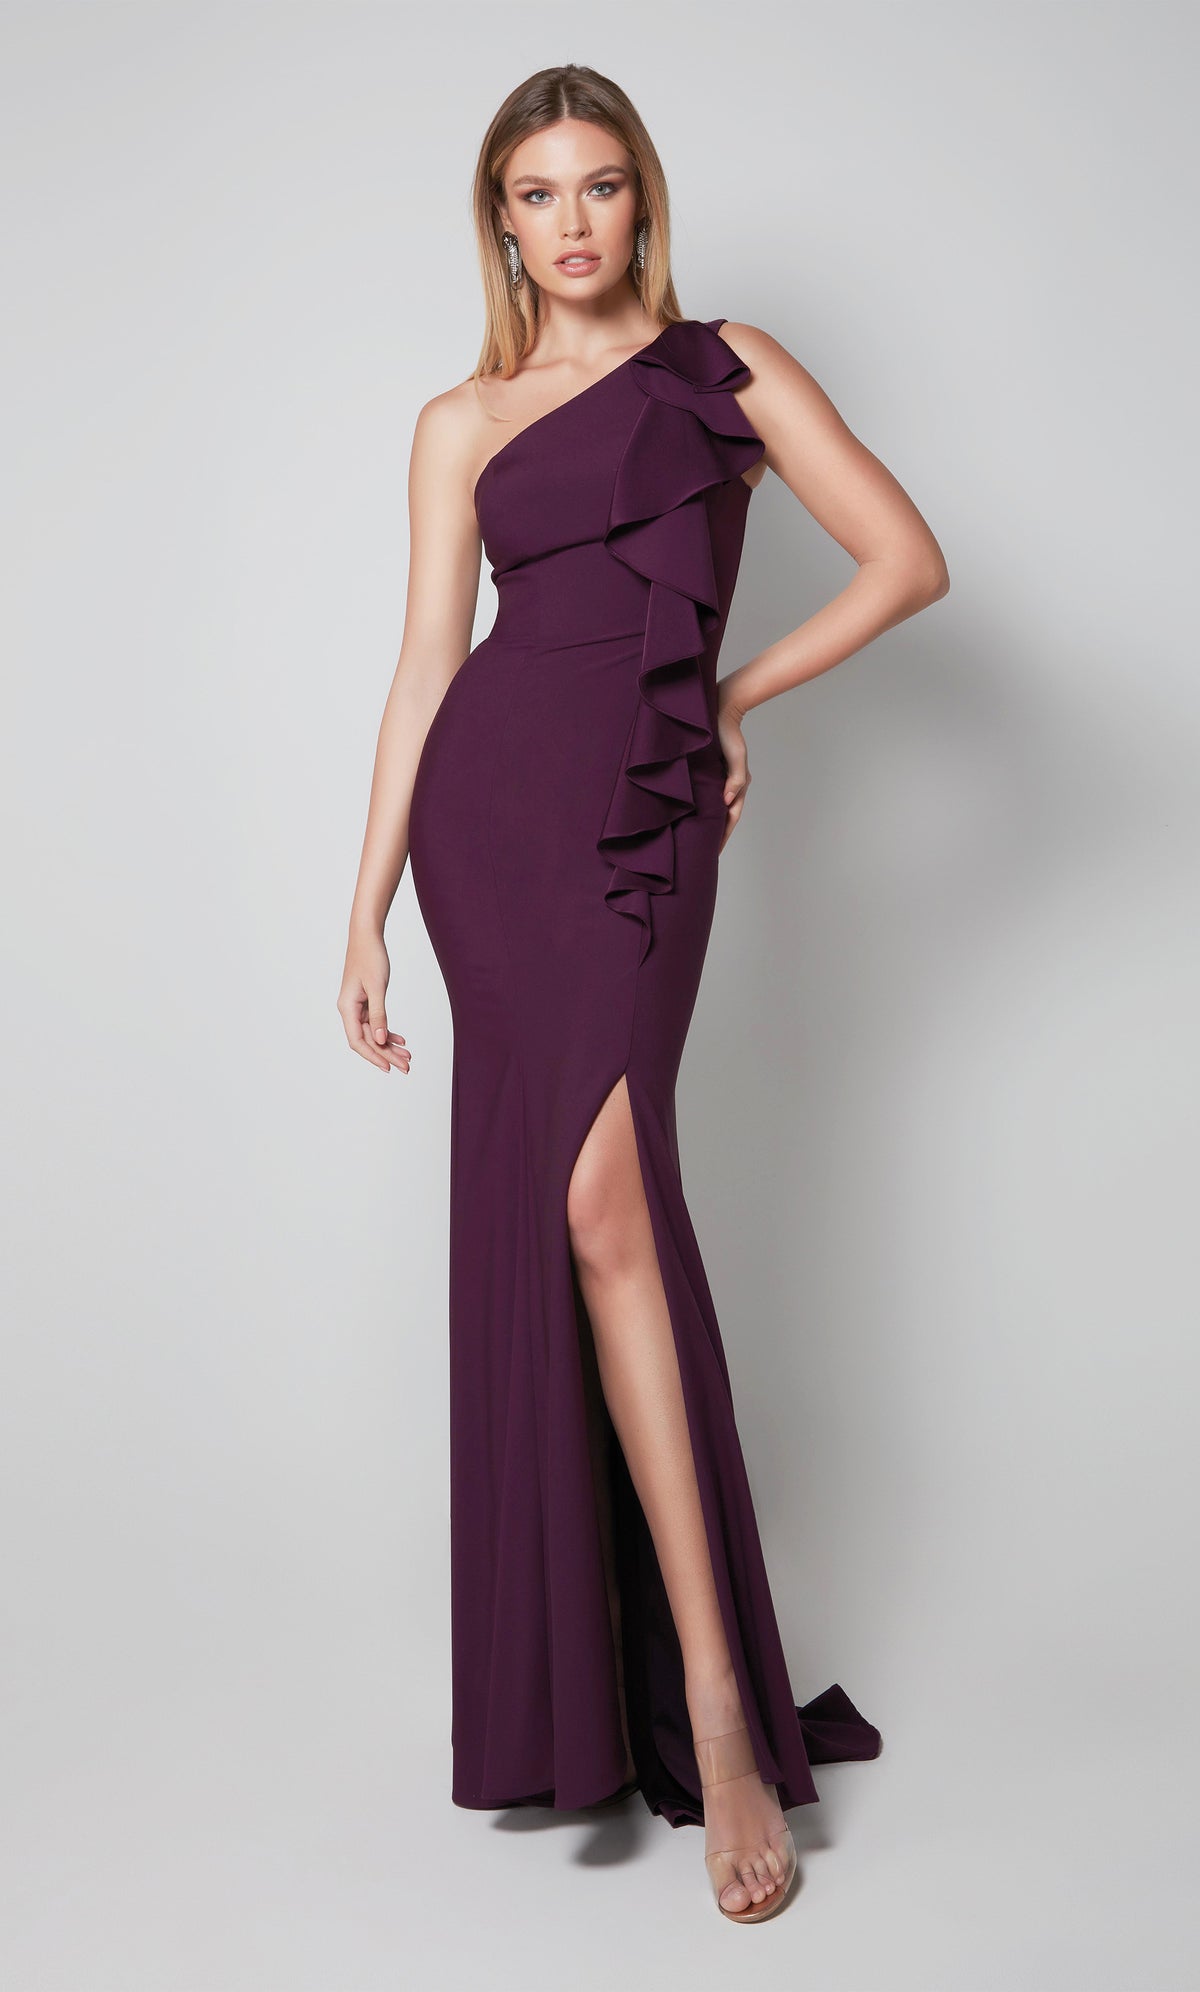 Long one shoulder ruffle dress with a side slit in purple.